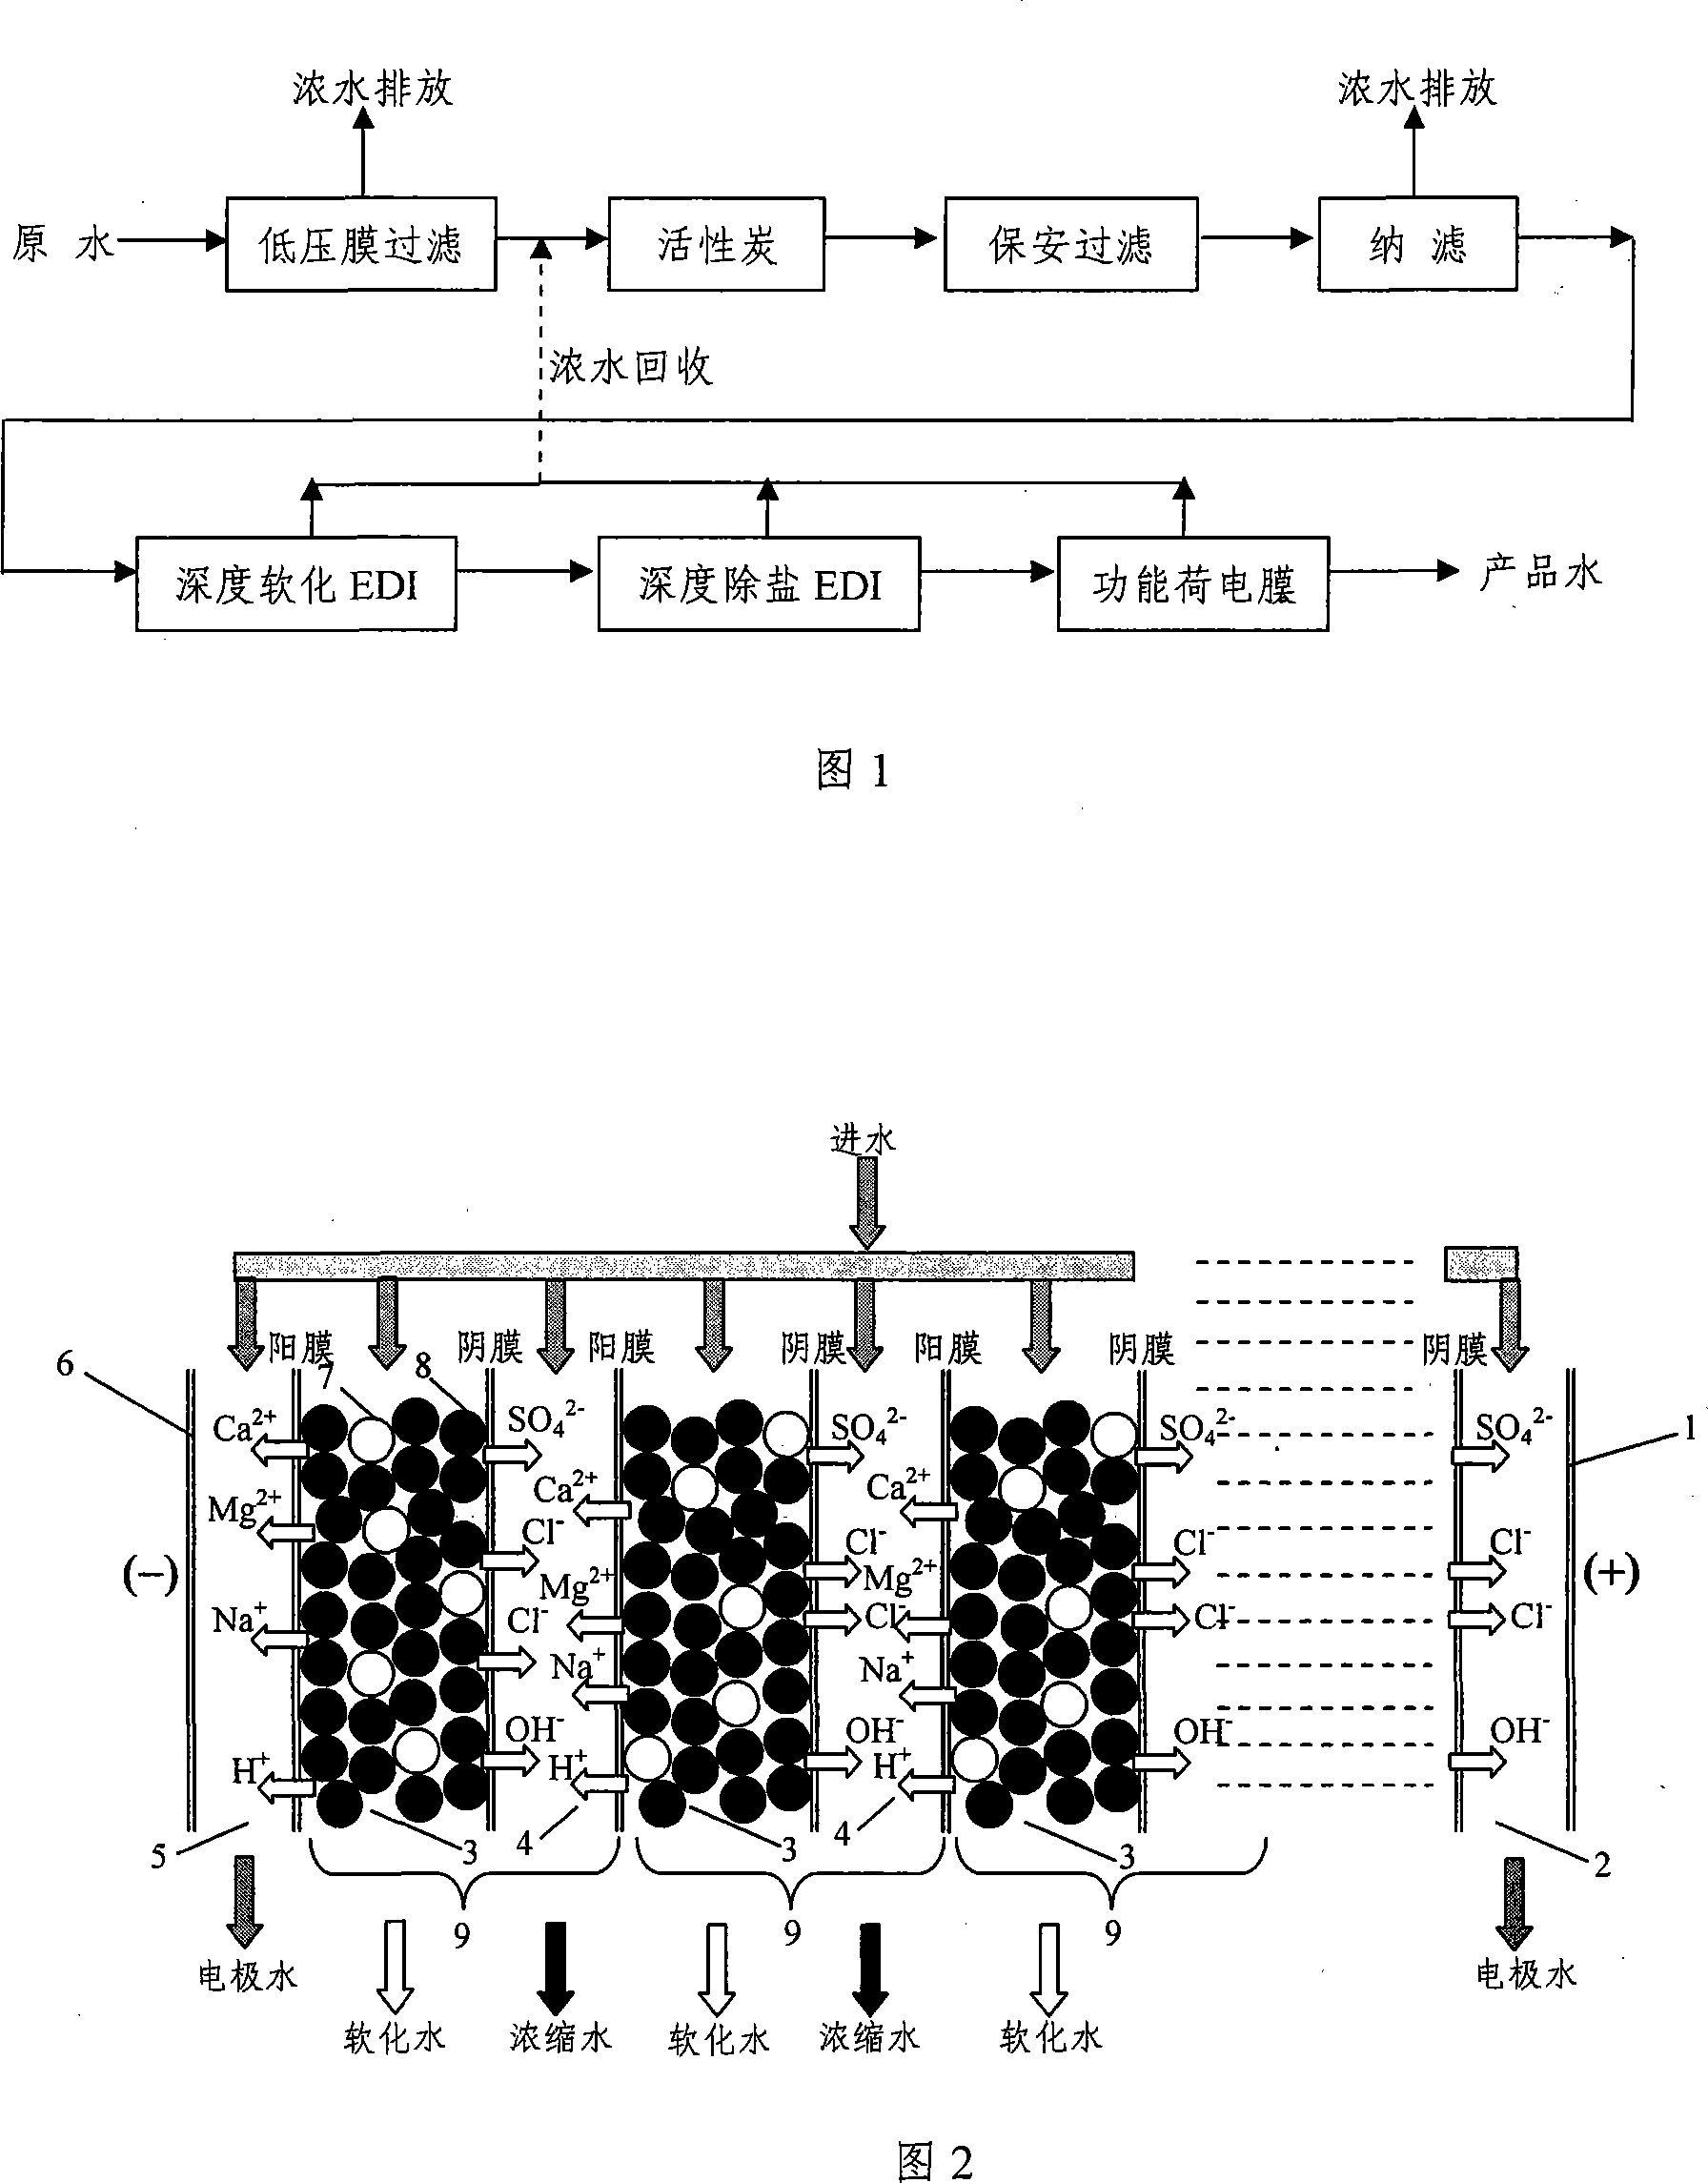 Method and device for producing water used for medicine preparation by collective film separation and electric deionizing